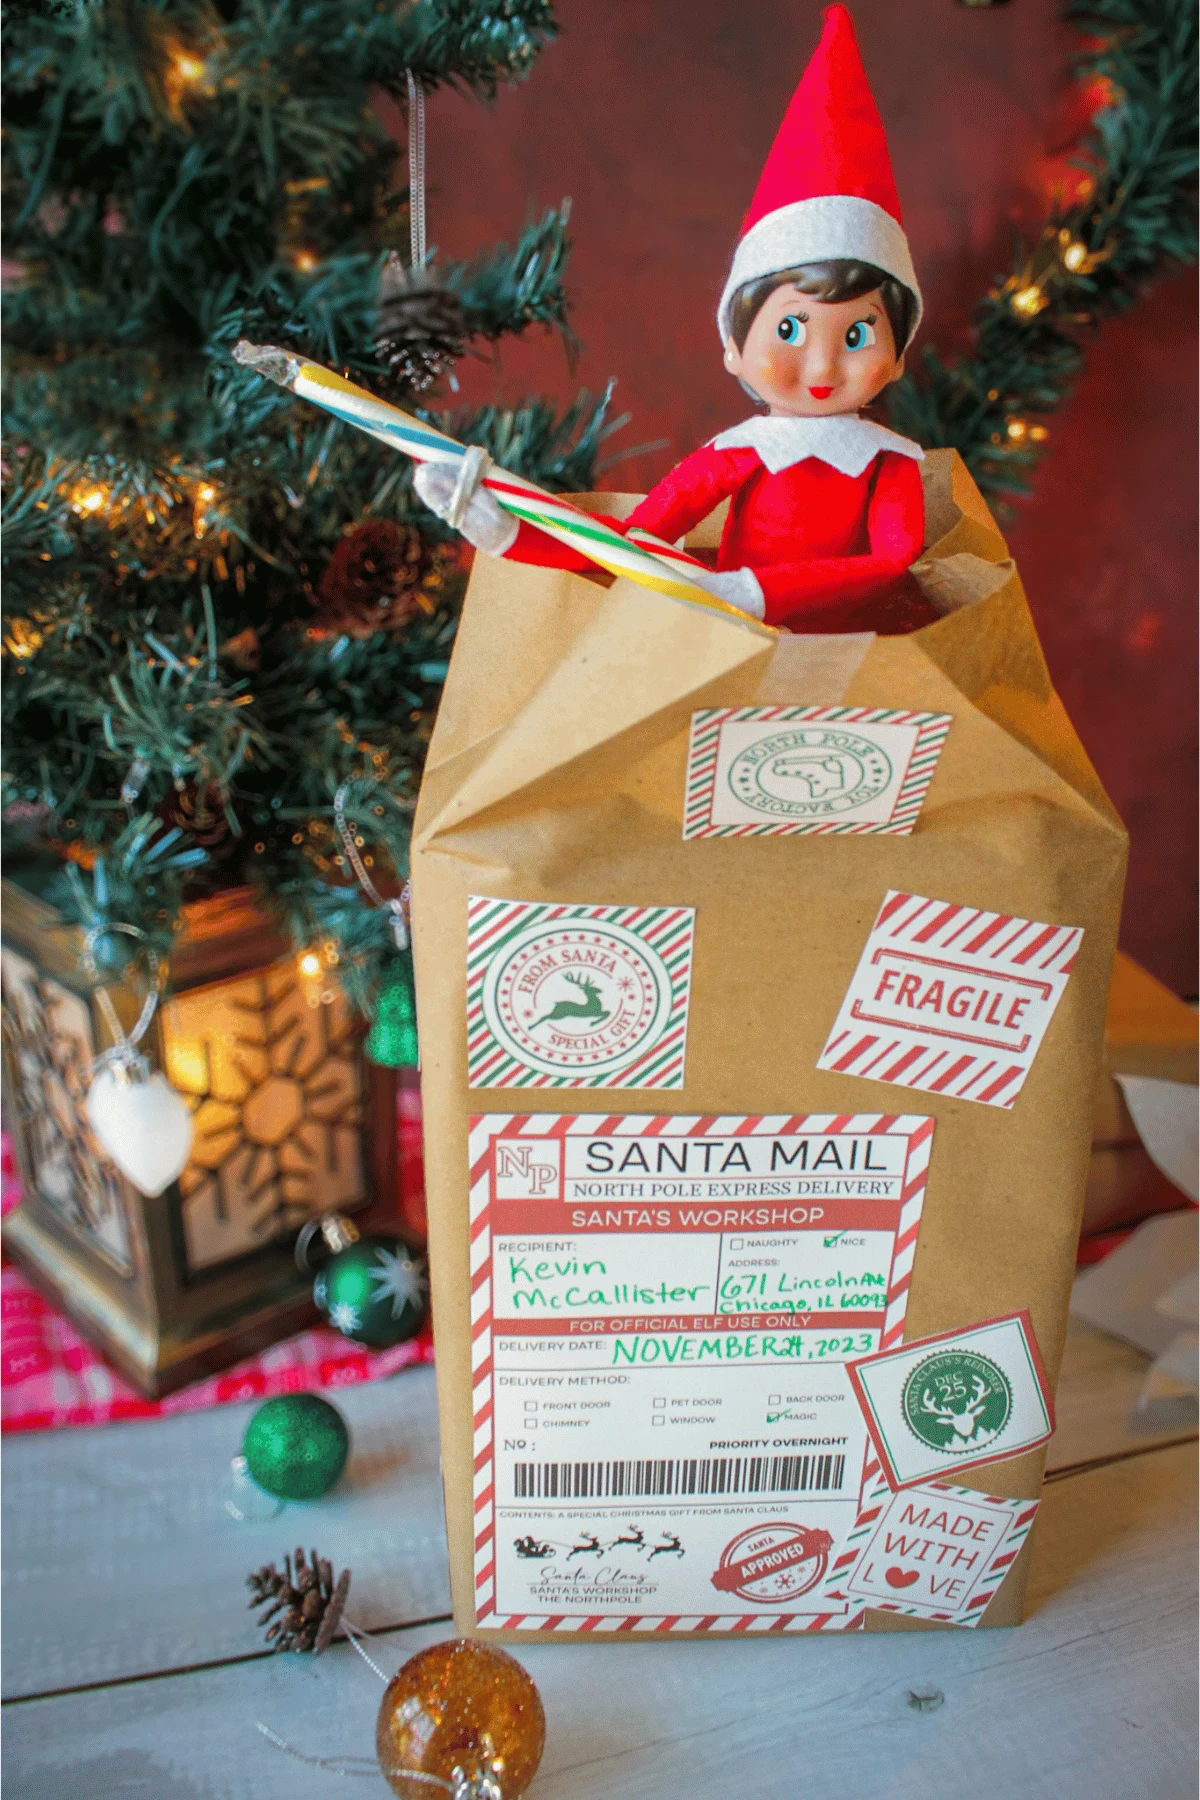 Elf on the Shelf bursting out of a box holding a candy cane